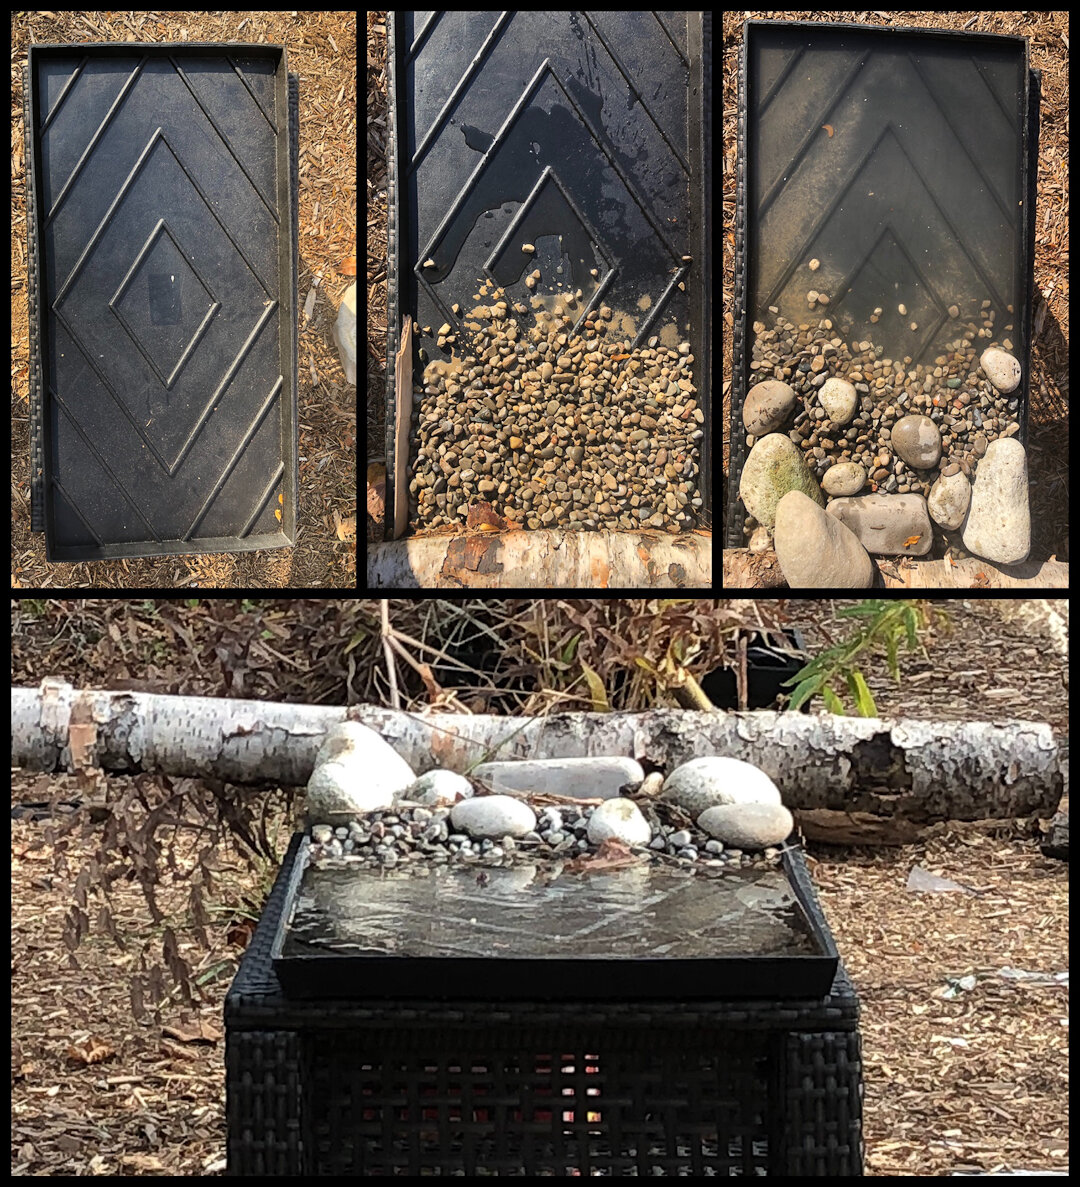 A step by step visual illustration of the creation of the reflection pond made from a rubberized boot tray.